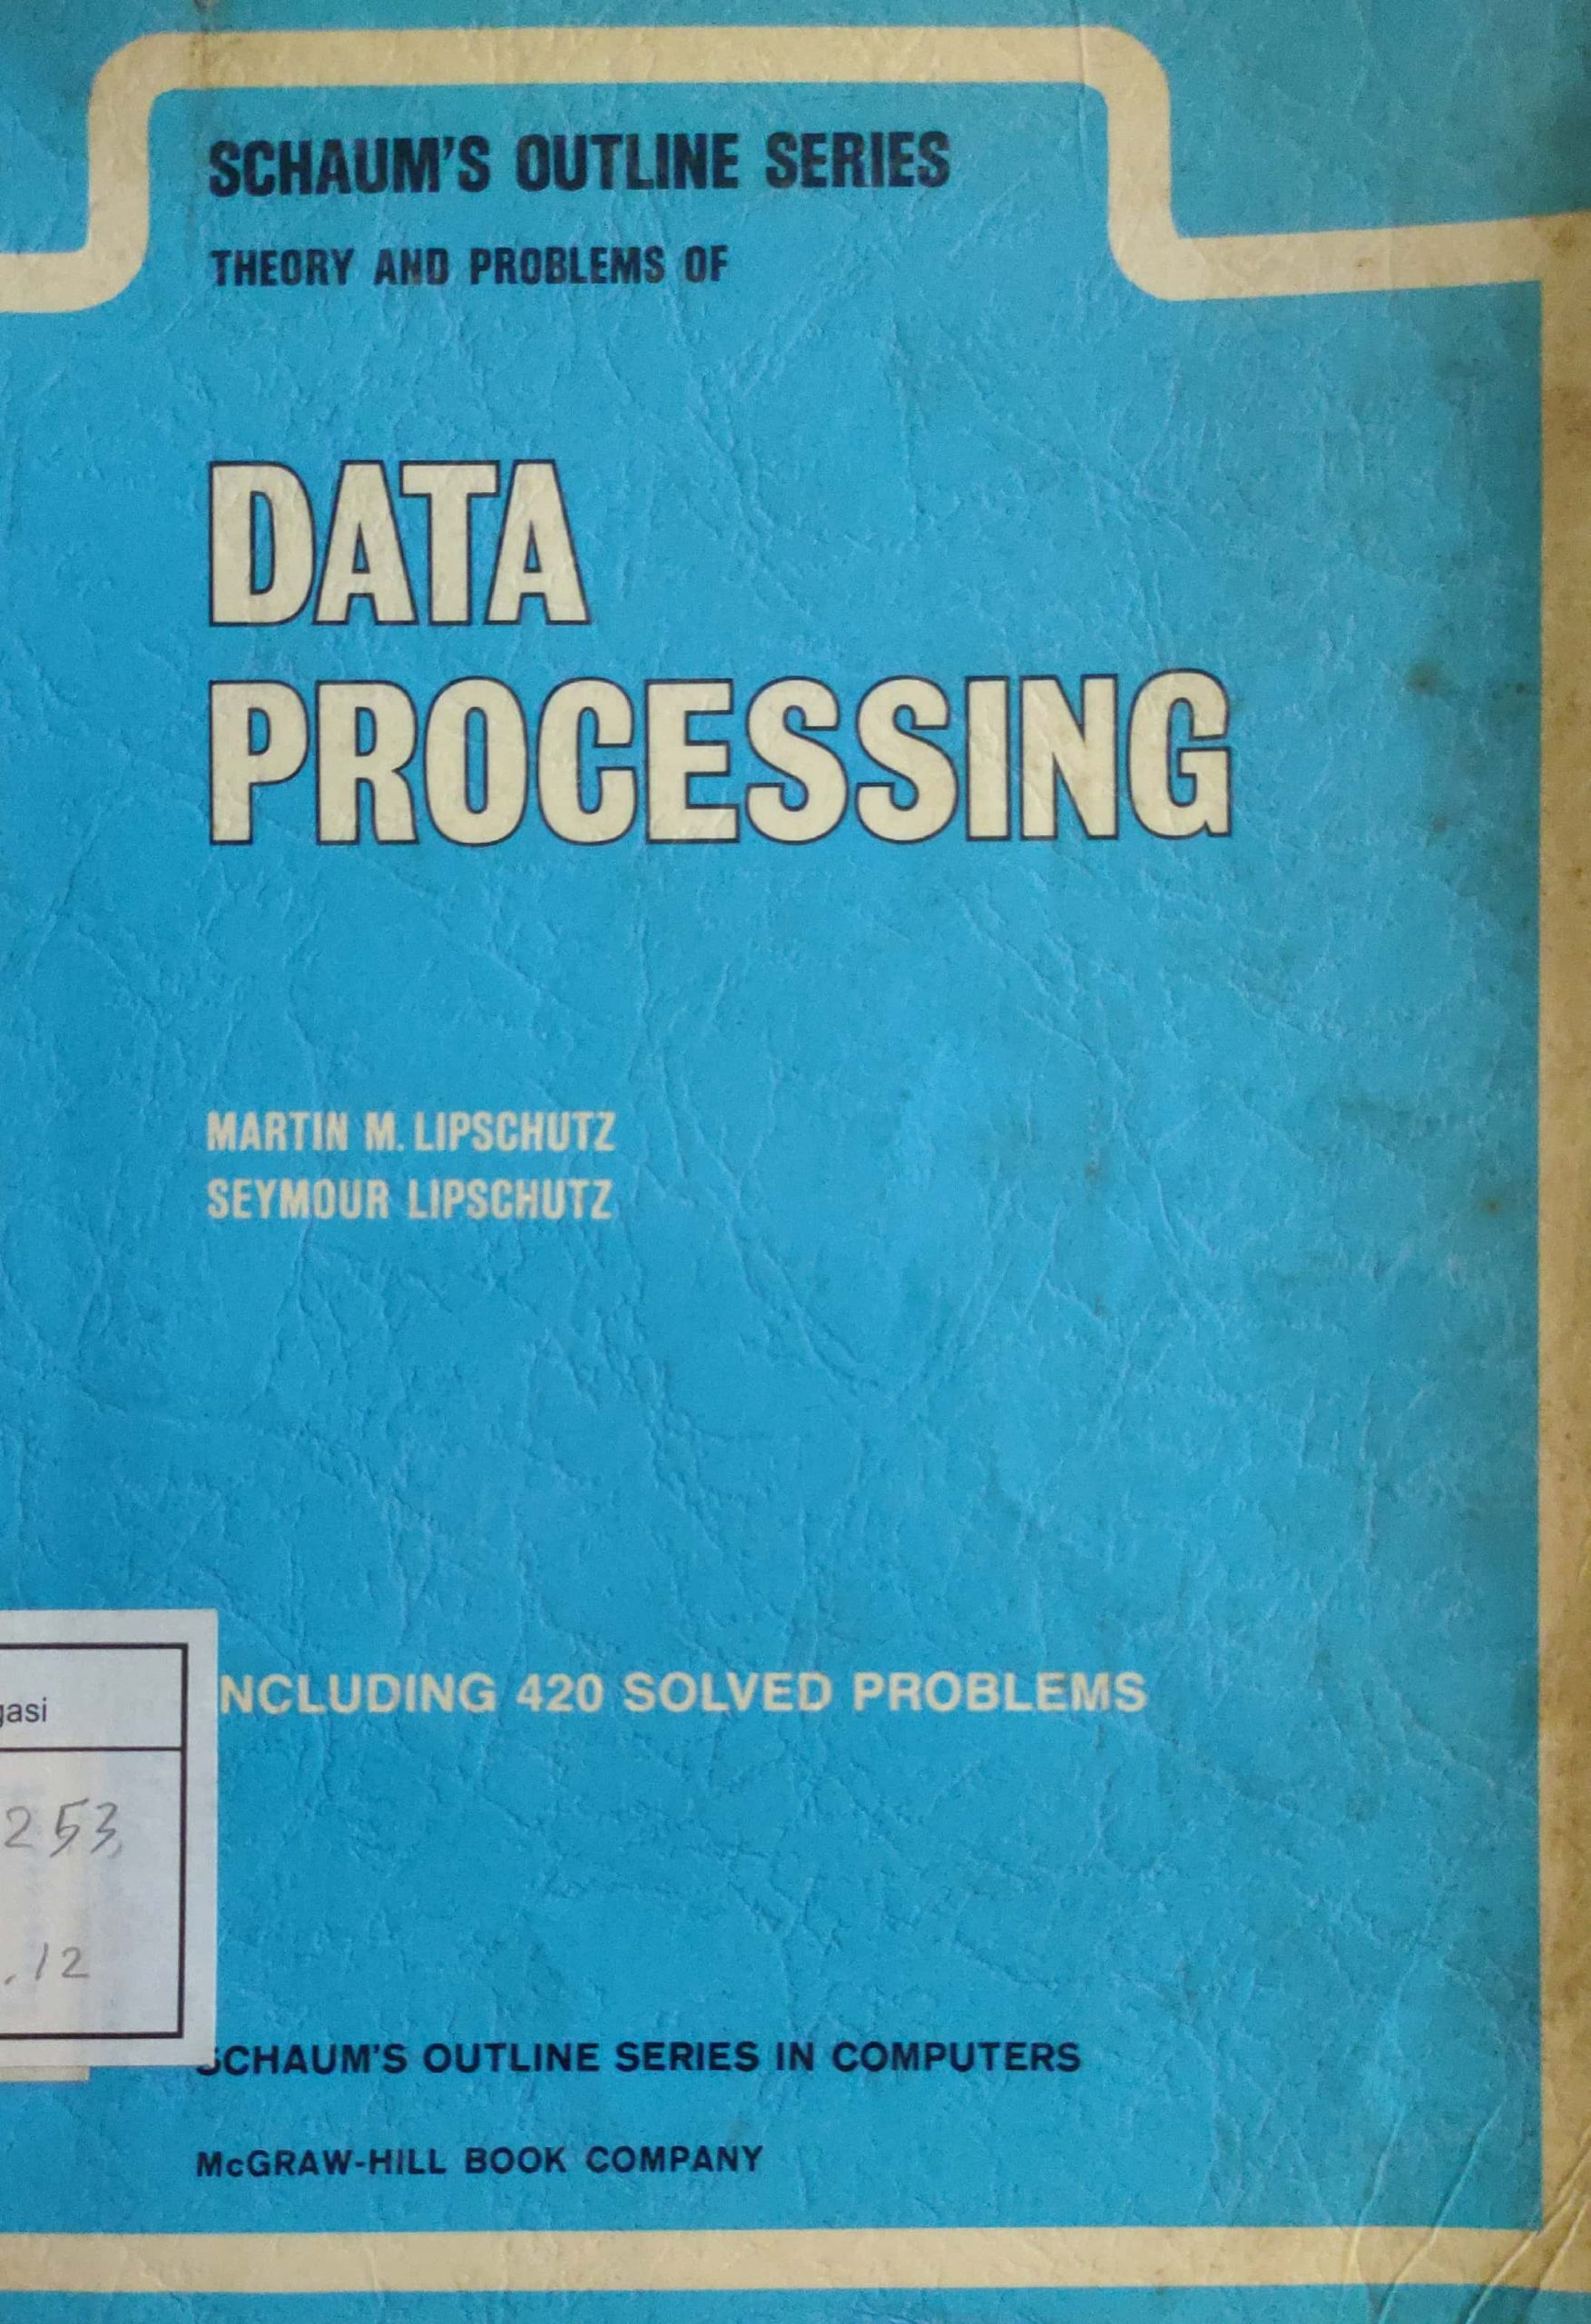 Theory and Problems of Data Processing